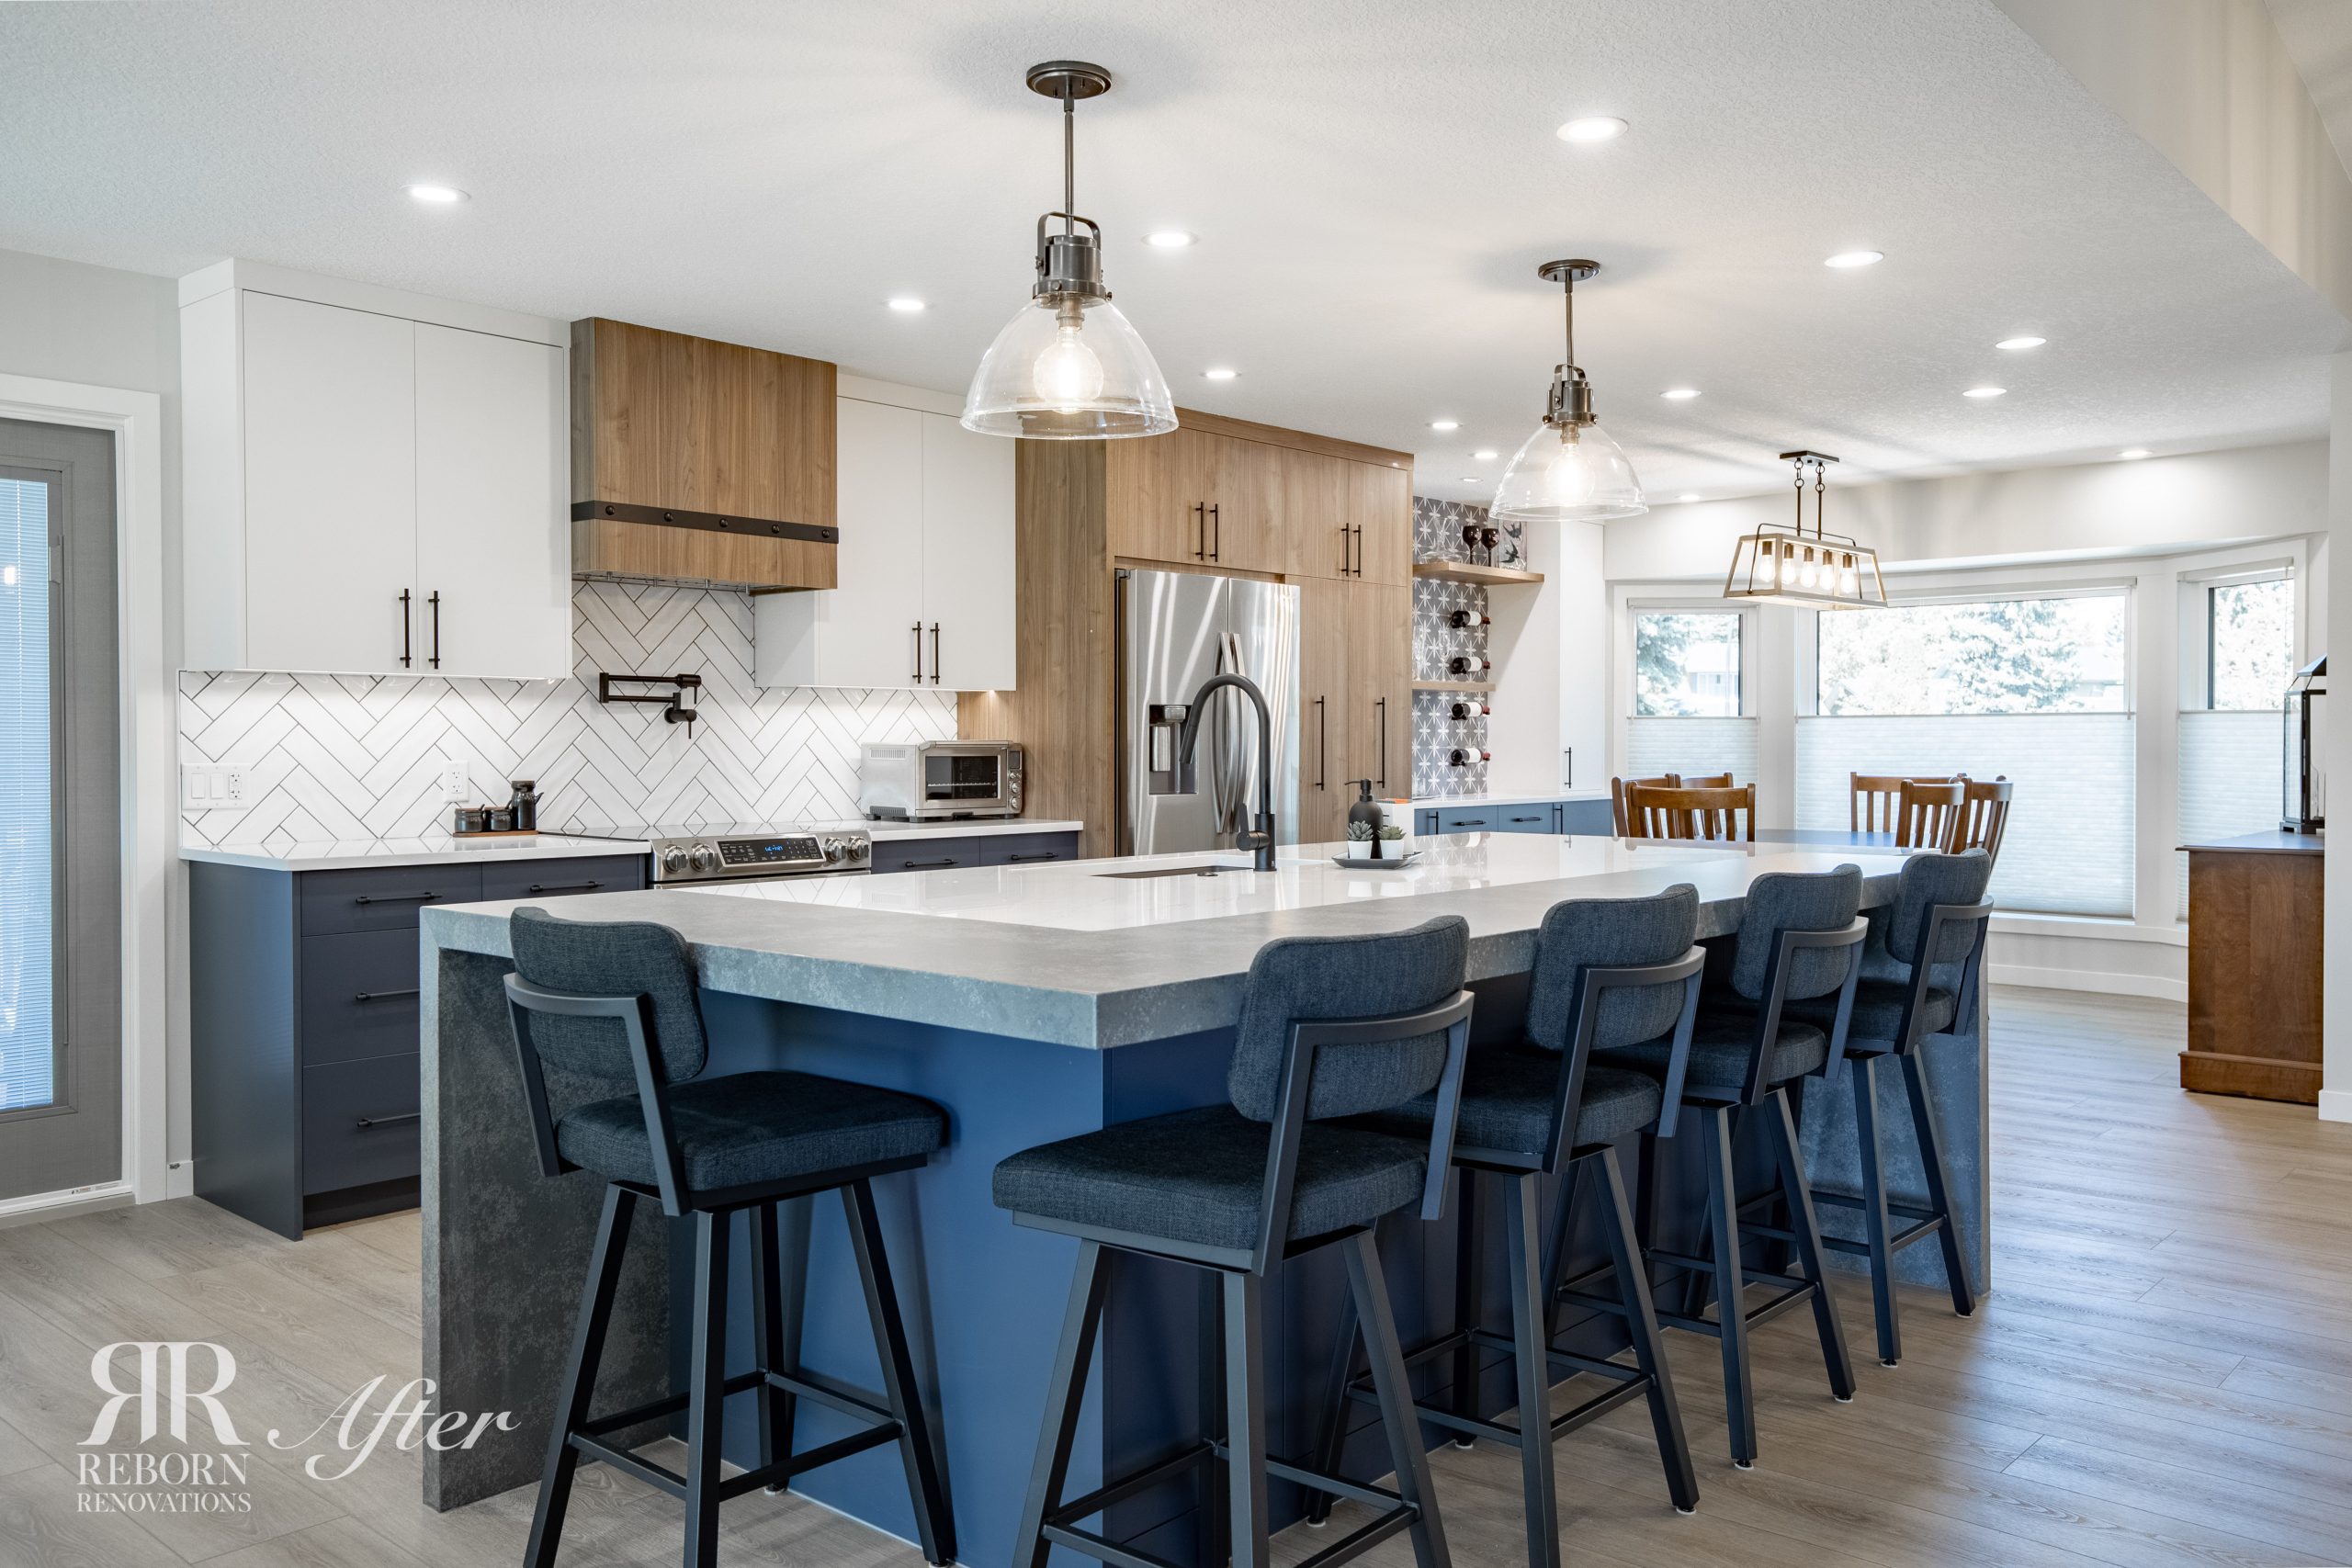 A newly completed home renovation, including kitchen remodel, with a large island and bar stools. Completed by Reborn Renovations